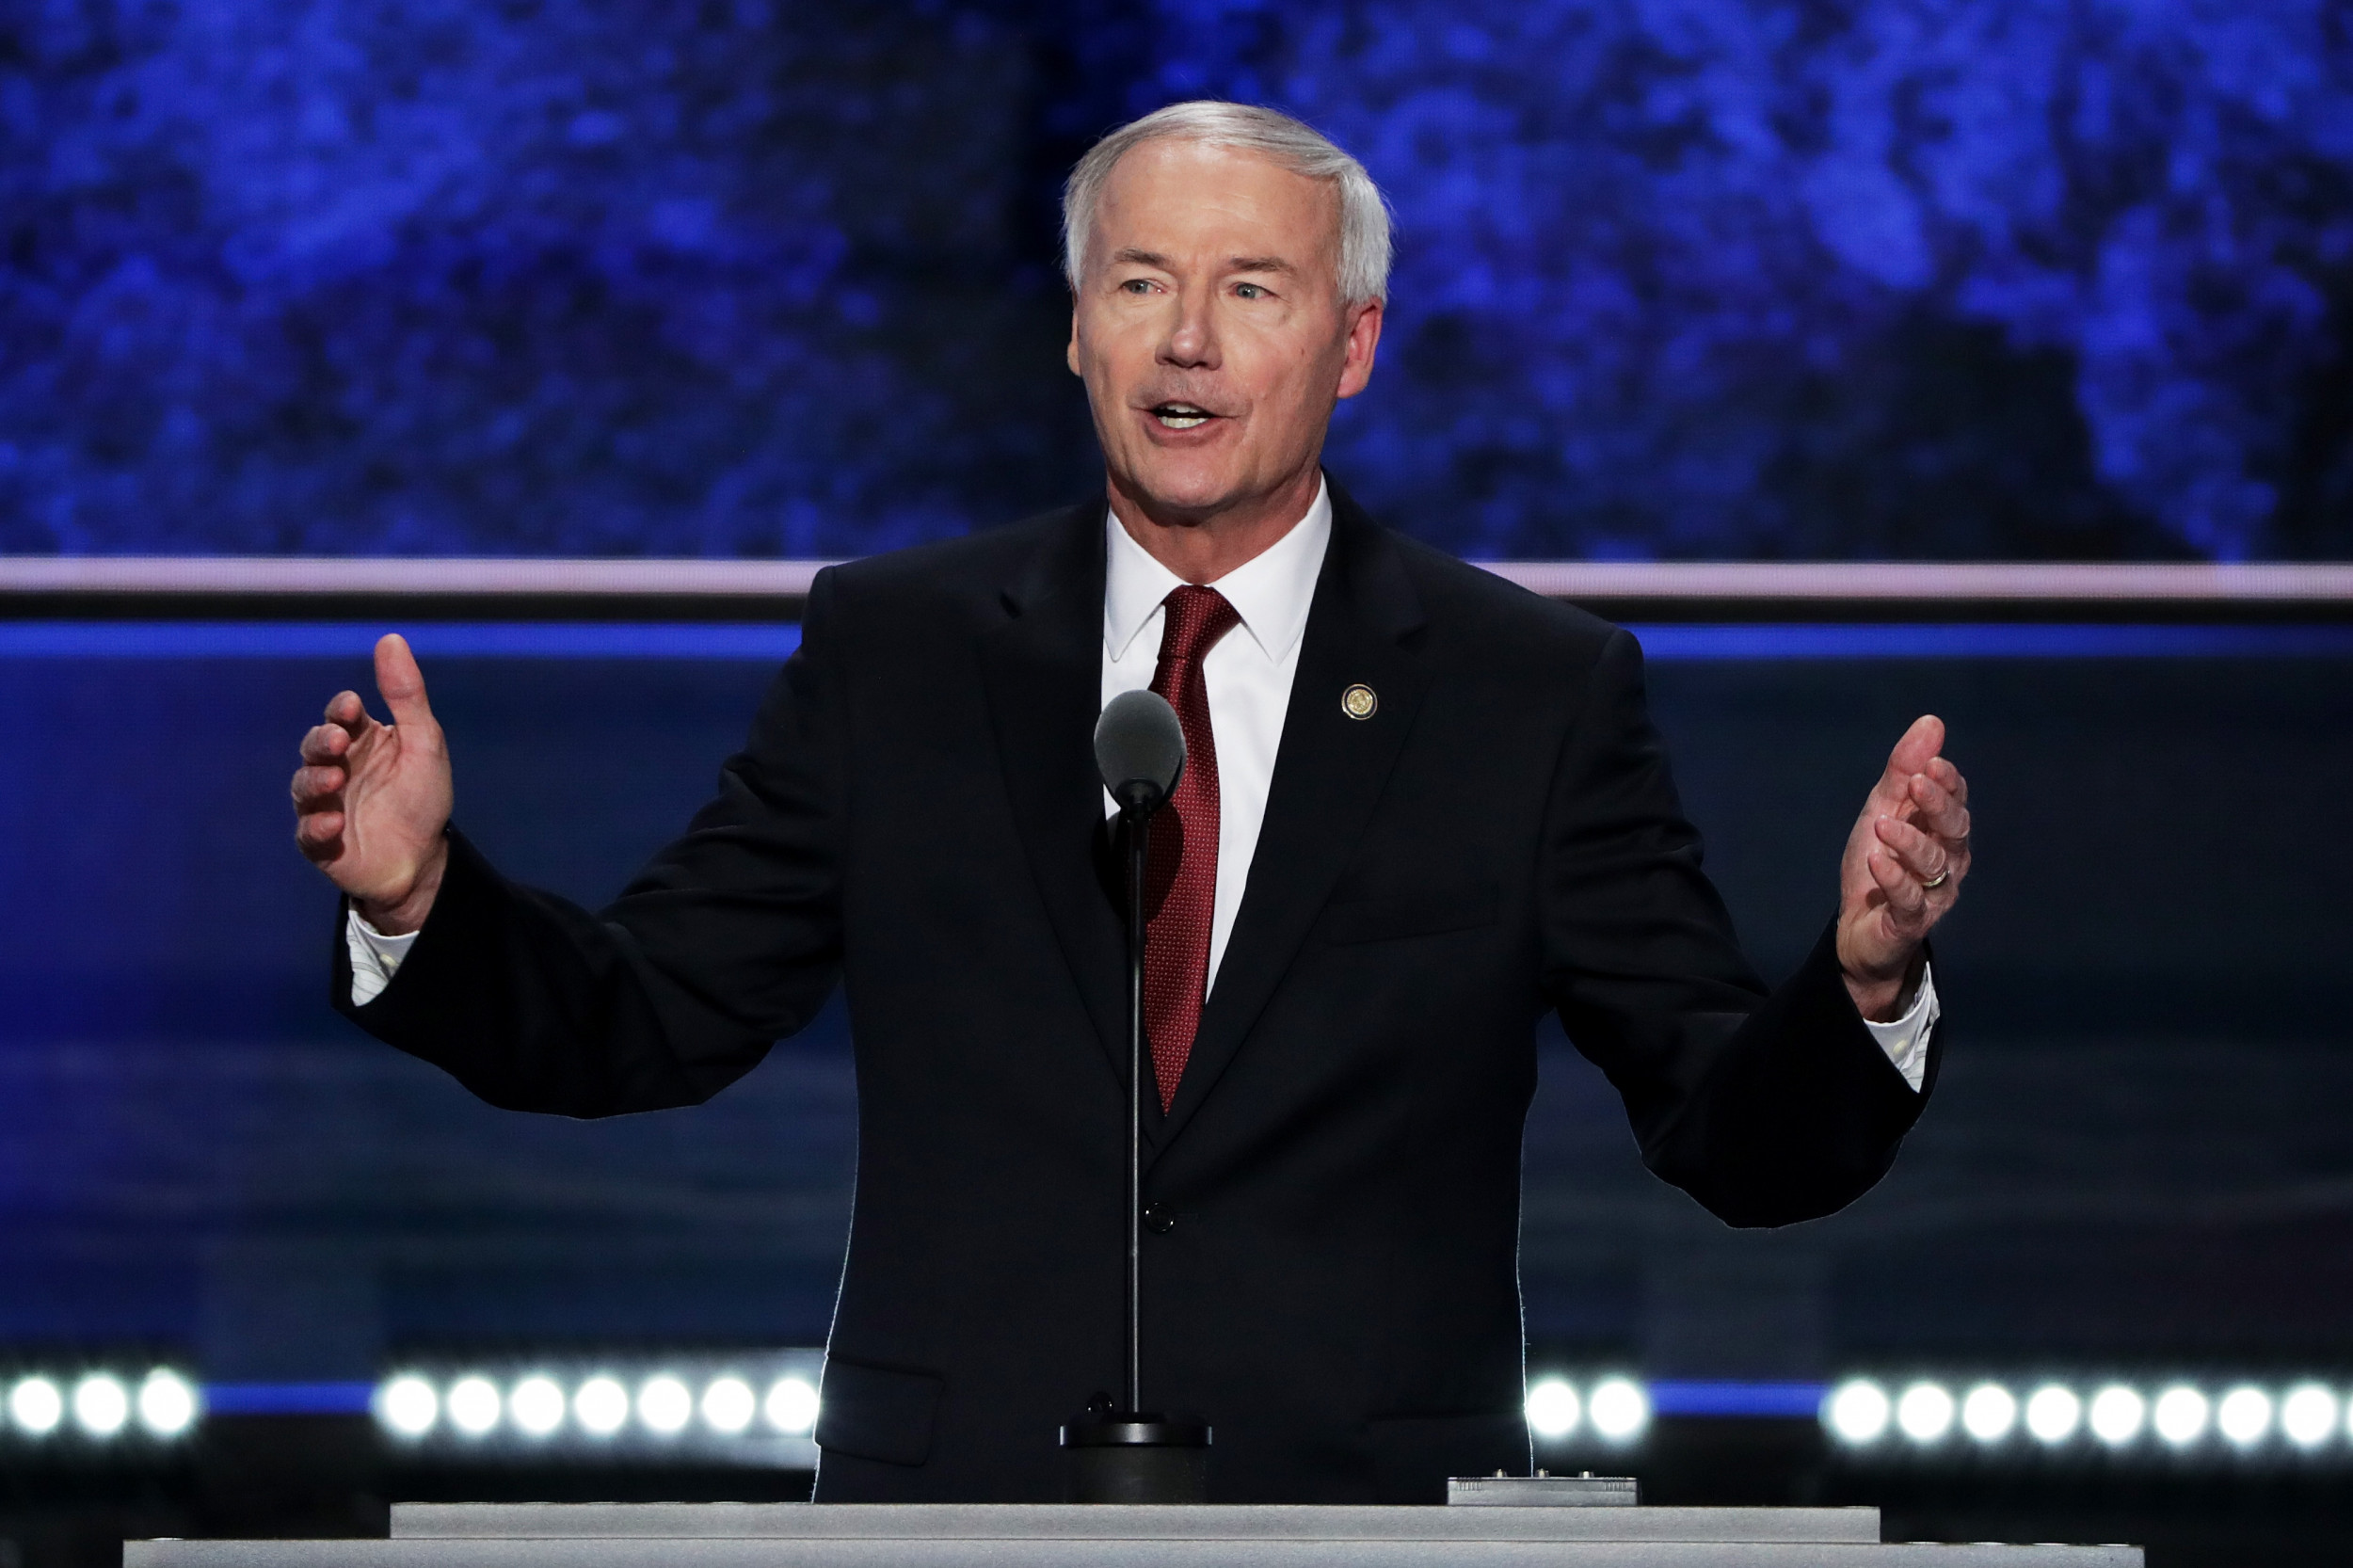 GOP Governor Asa Hutchinson Sides Against Marjorie Taylor Greene